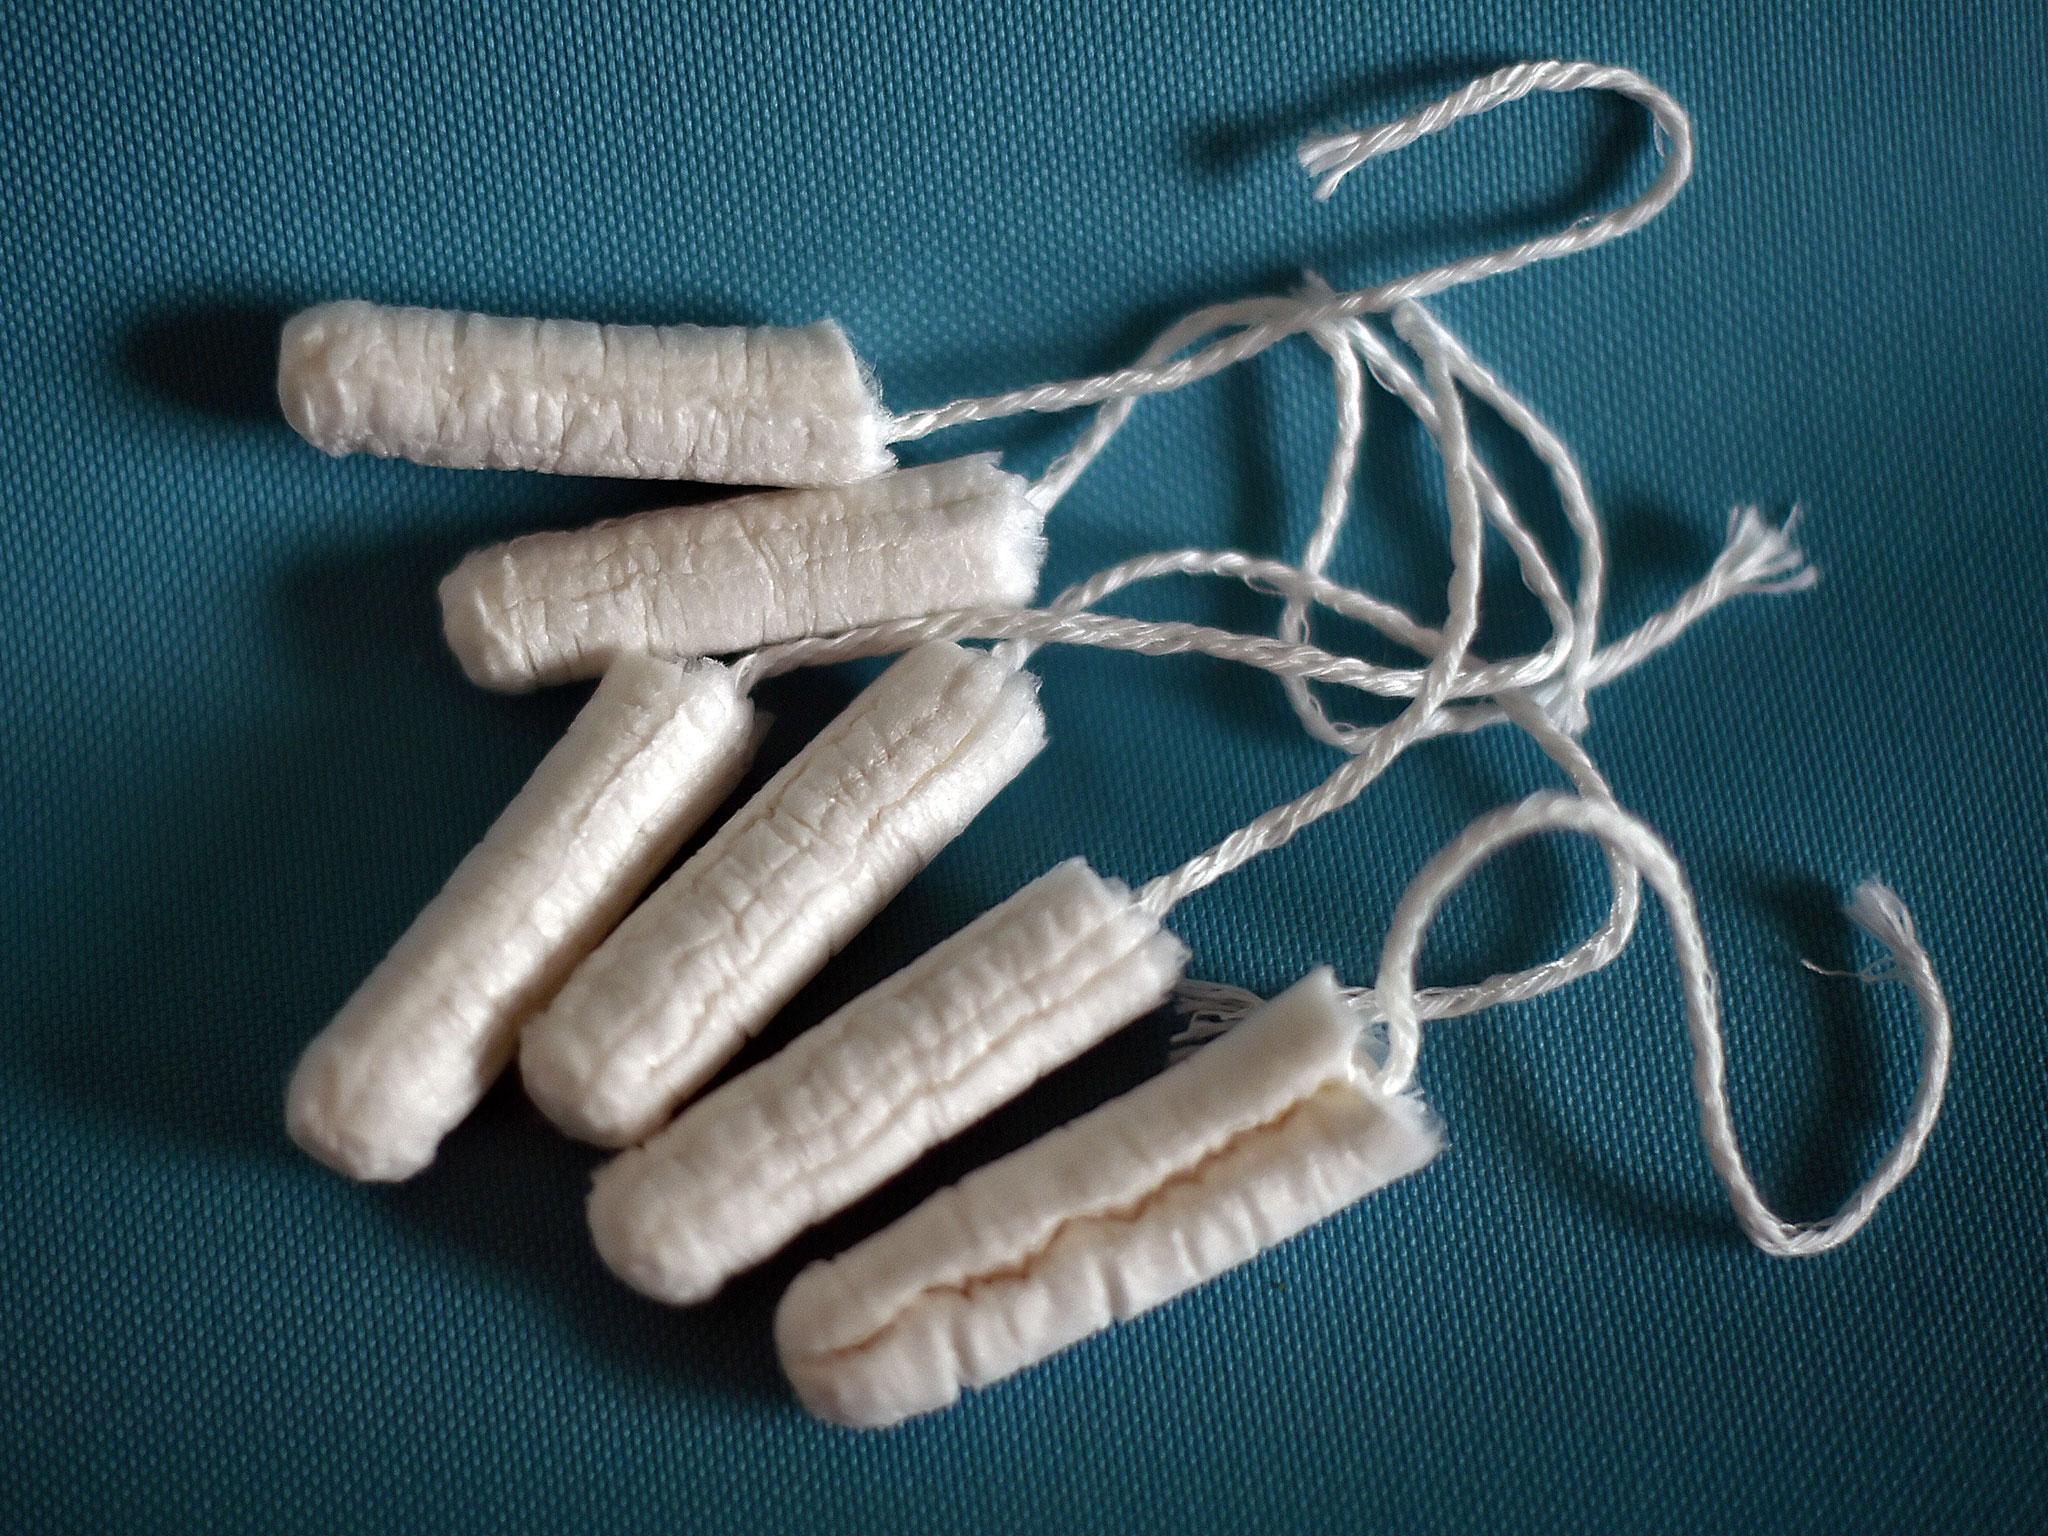 Women have had to pay a five per cent levy on sanitary products as they were deemed a 'luxury item'